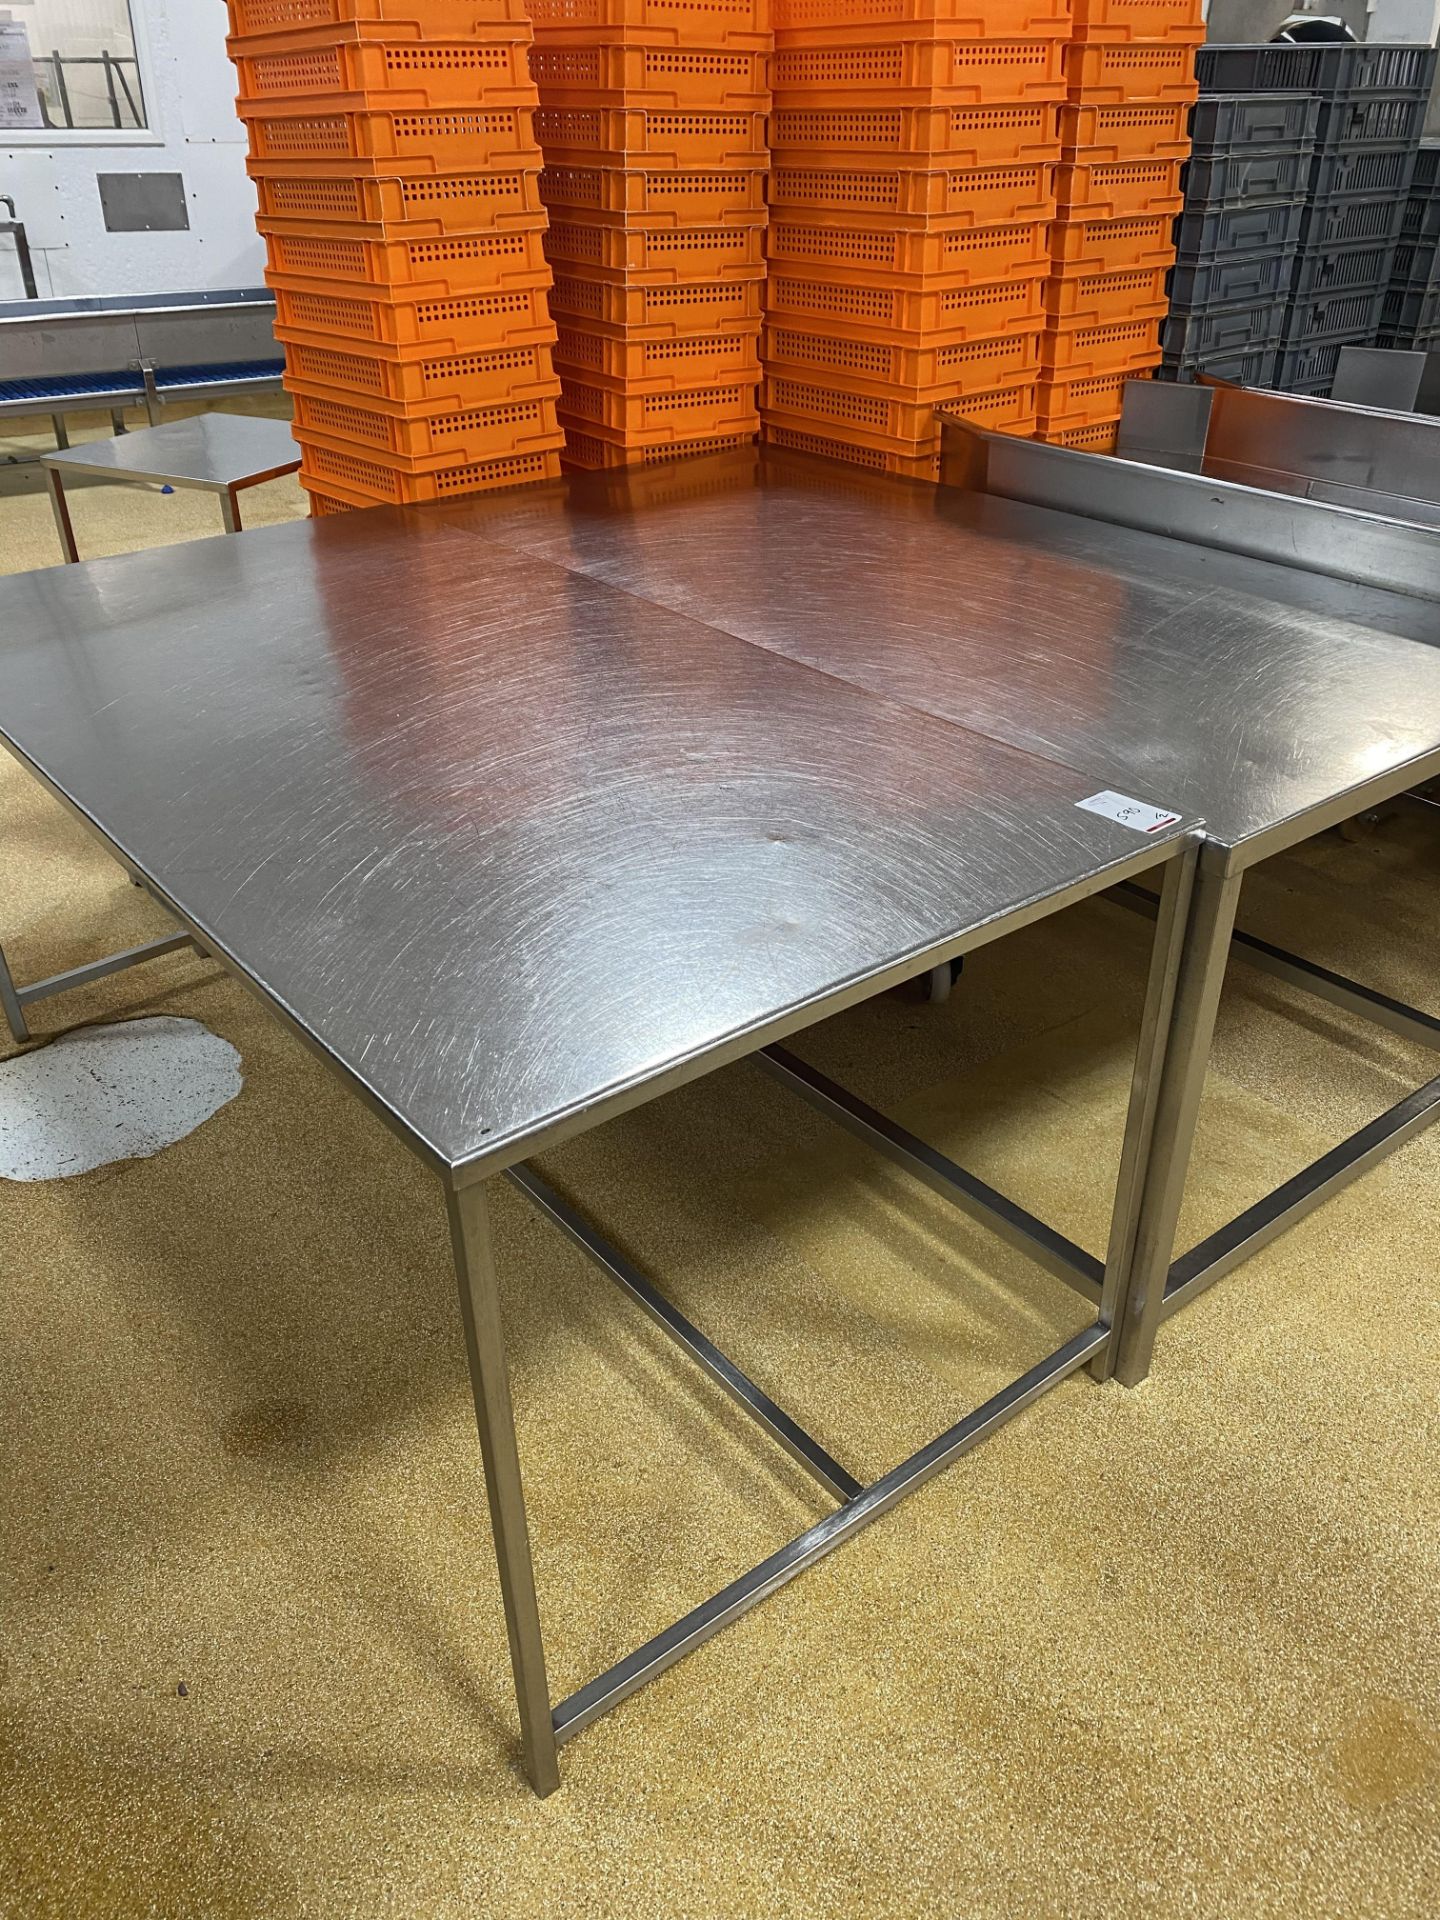 2 Stainless steel preparation tables , length 190c